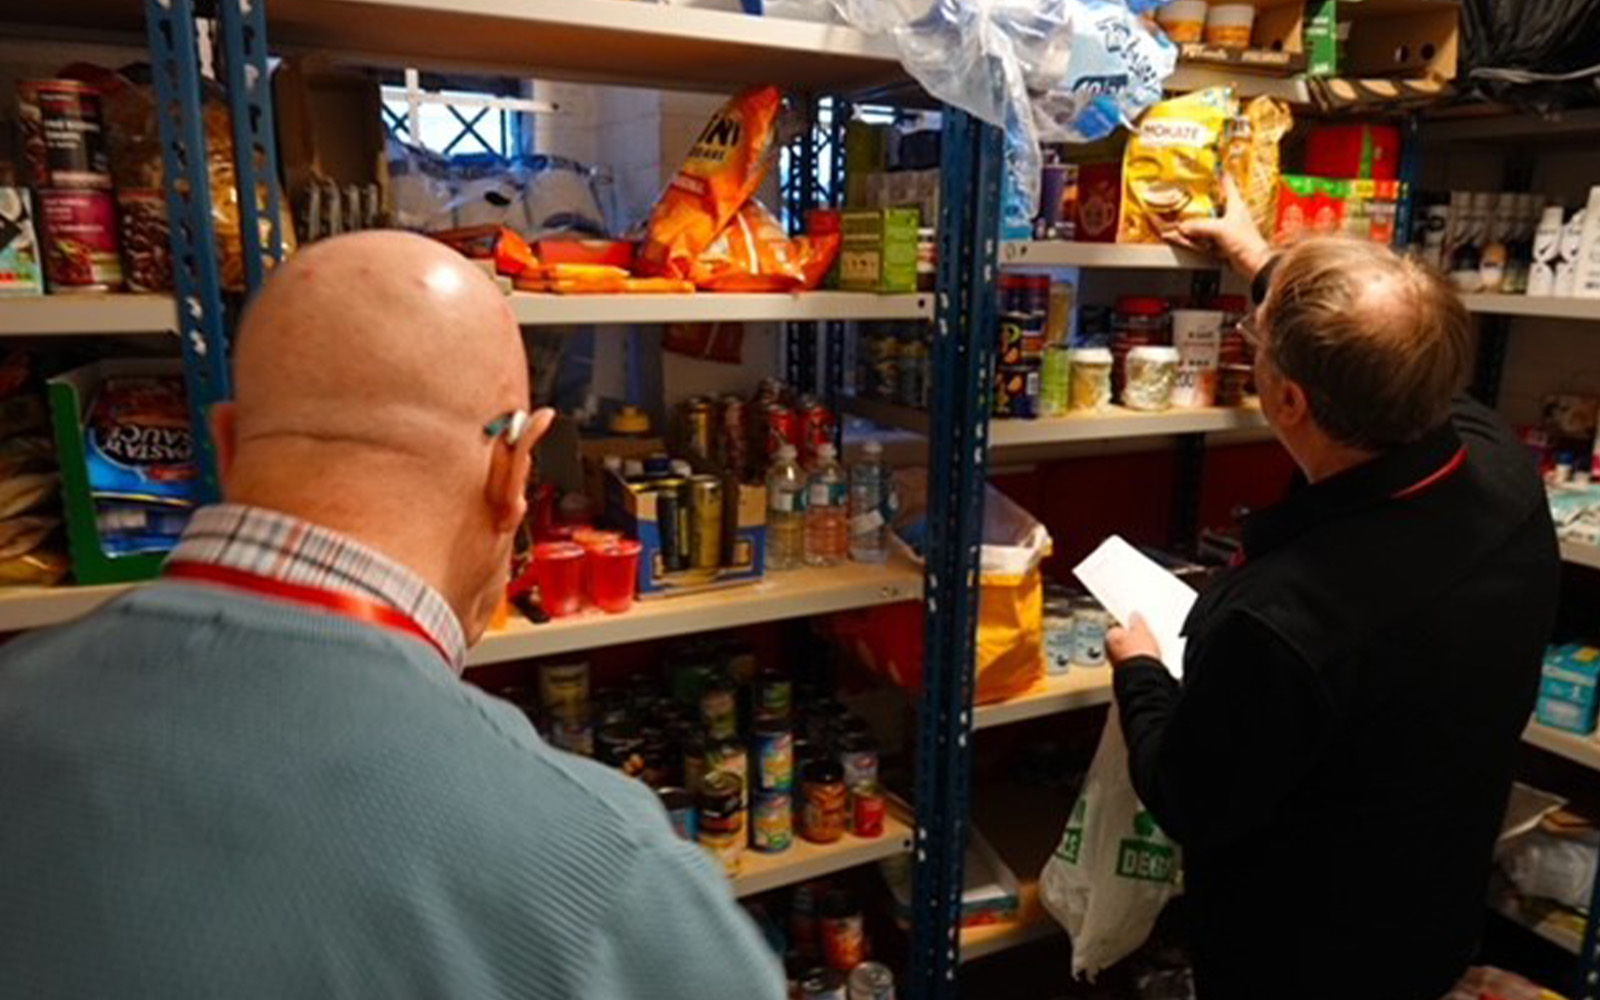 Two volunteers with the shelves of food used to feed the homeless